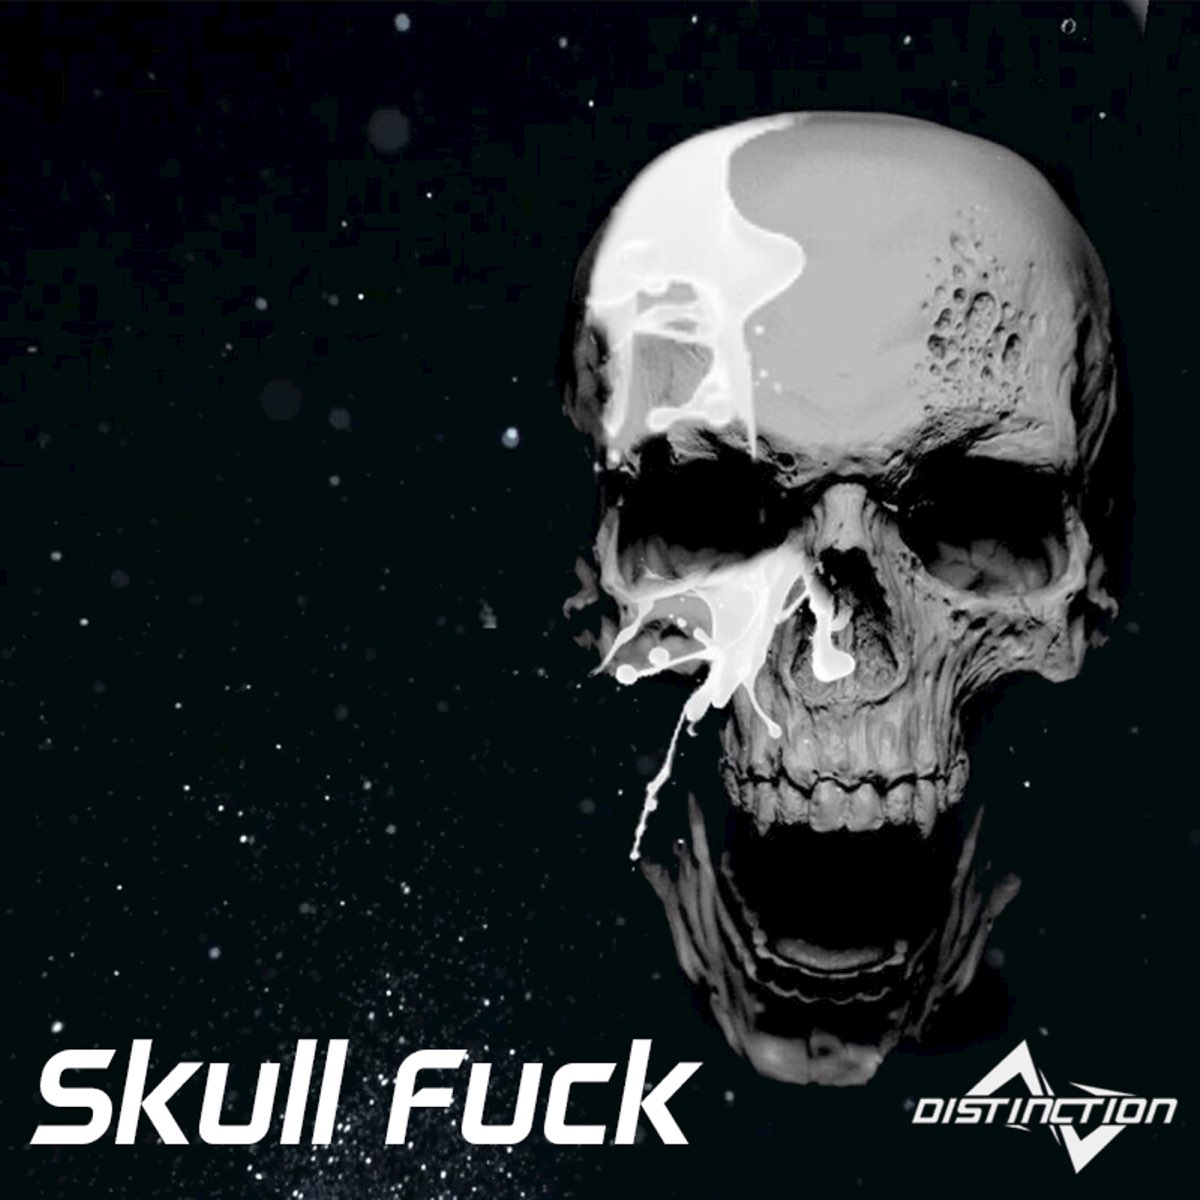 What is skull fucking